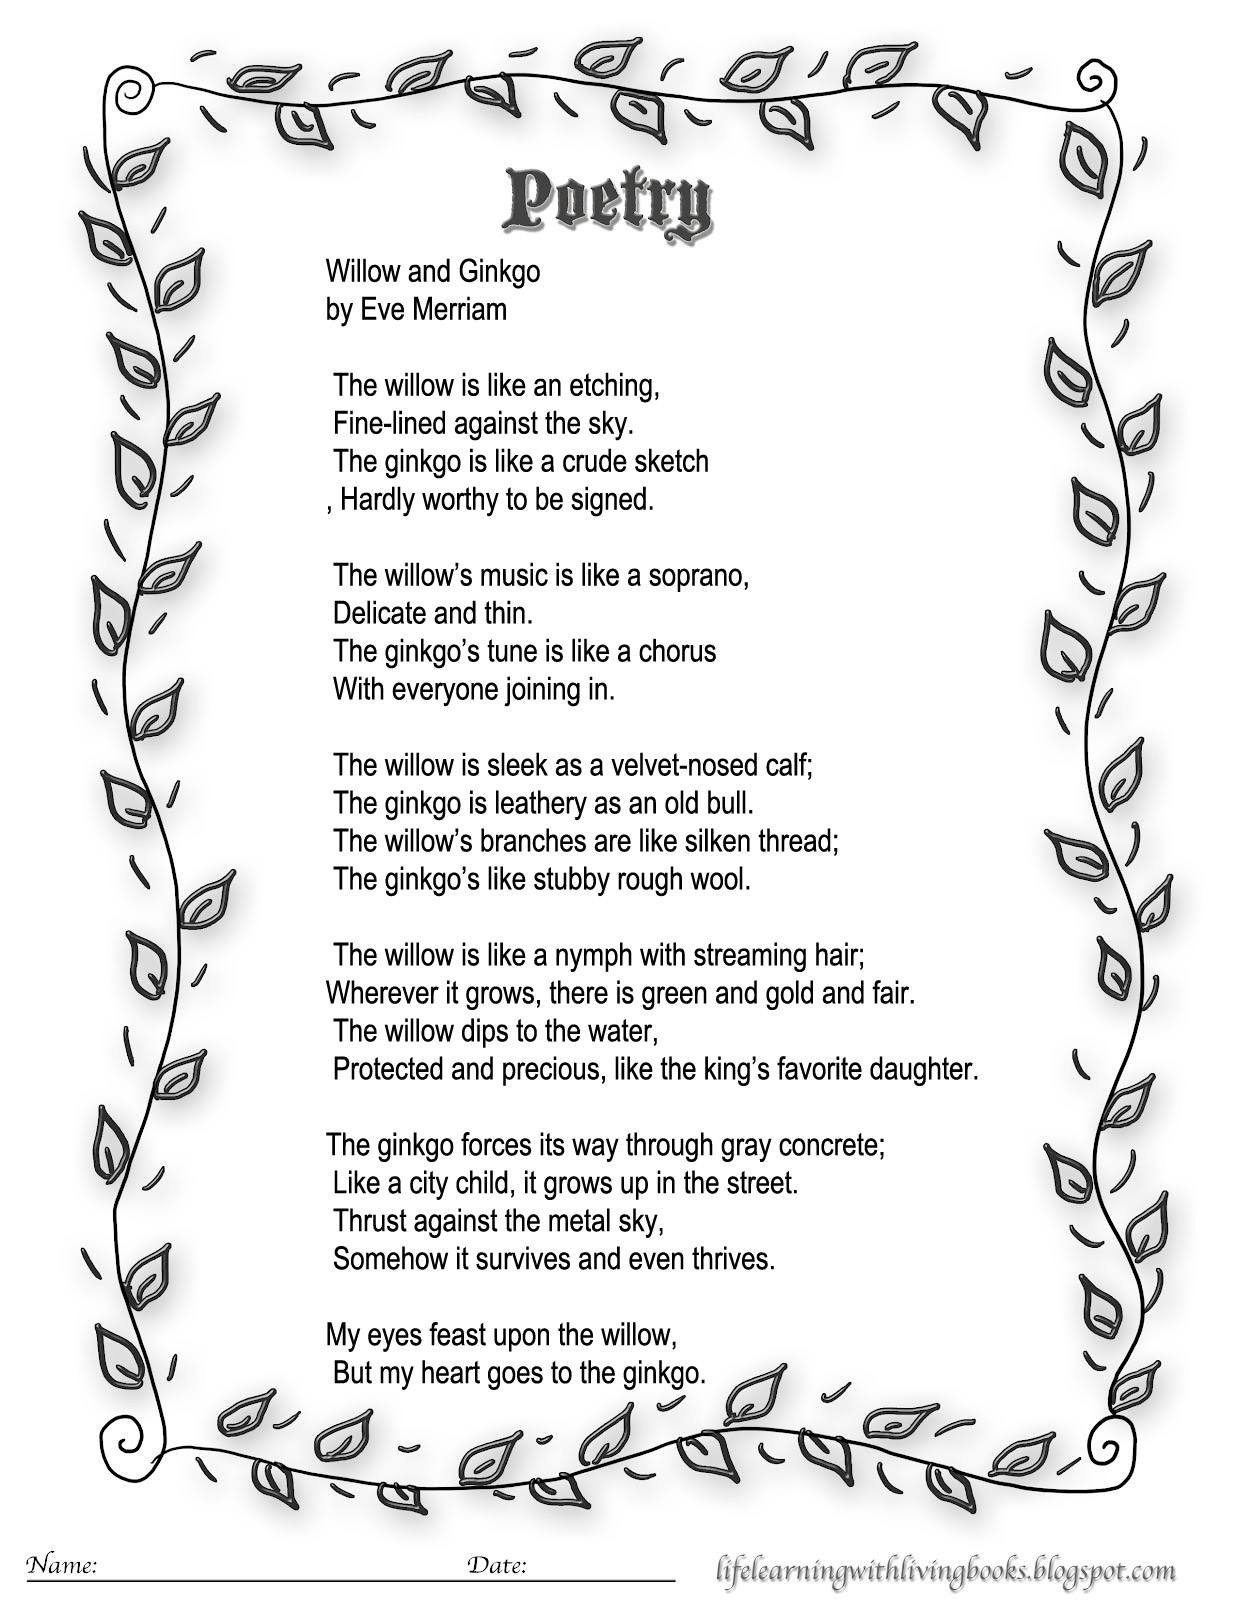 What should my poem be about?